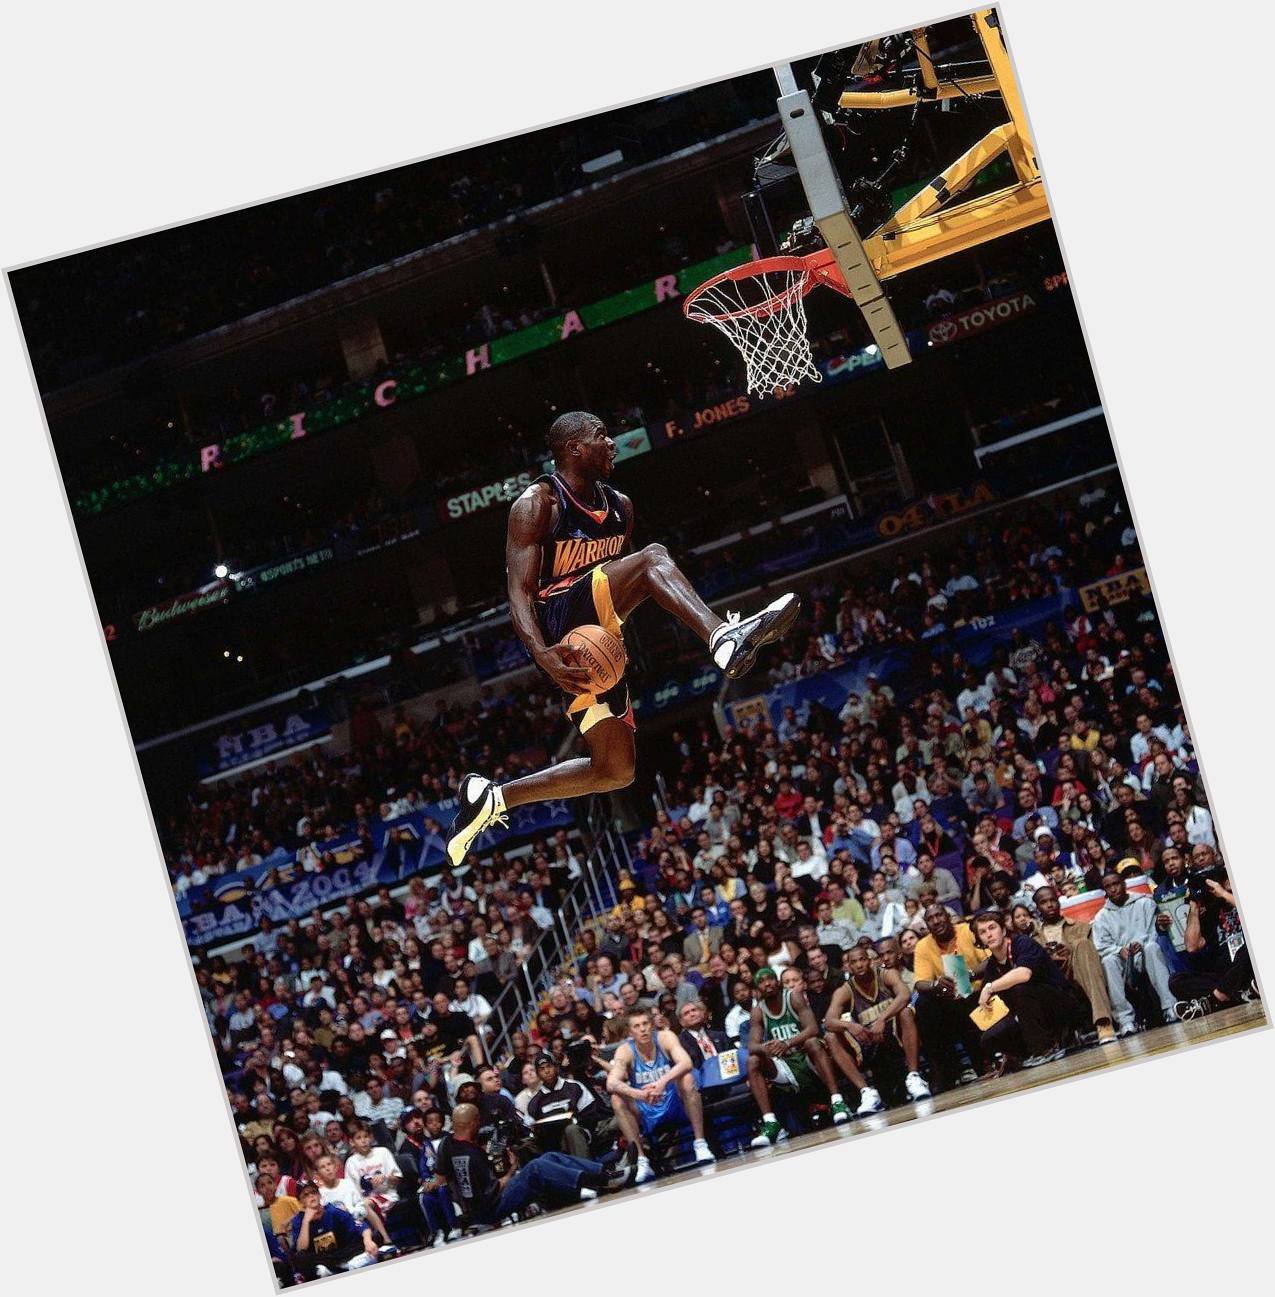 Happy Birthday Jason Richardson, thanks for some of the craziest dunks we have ever seen 